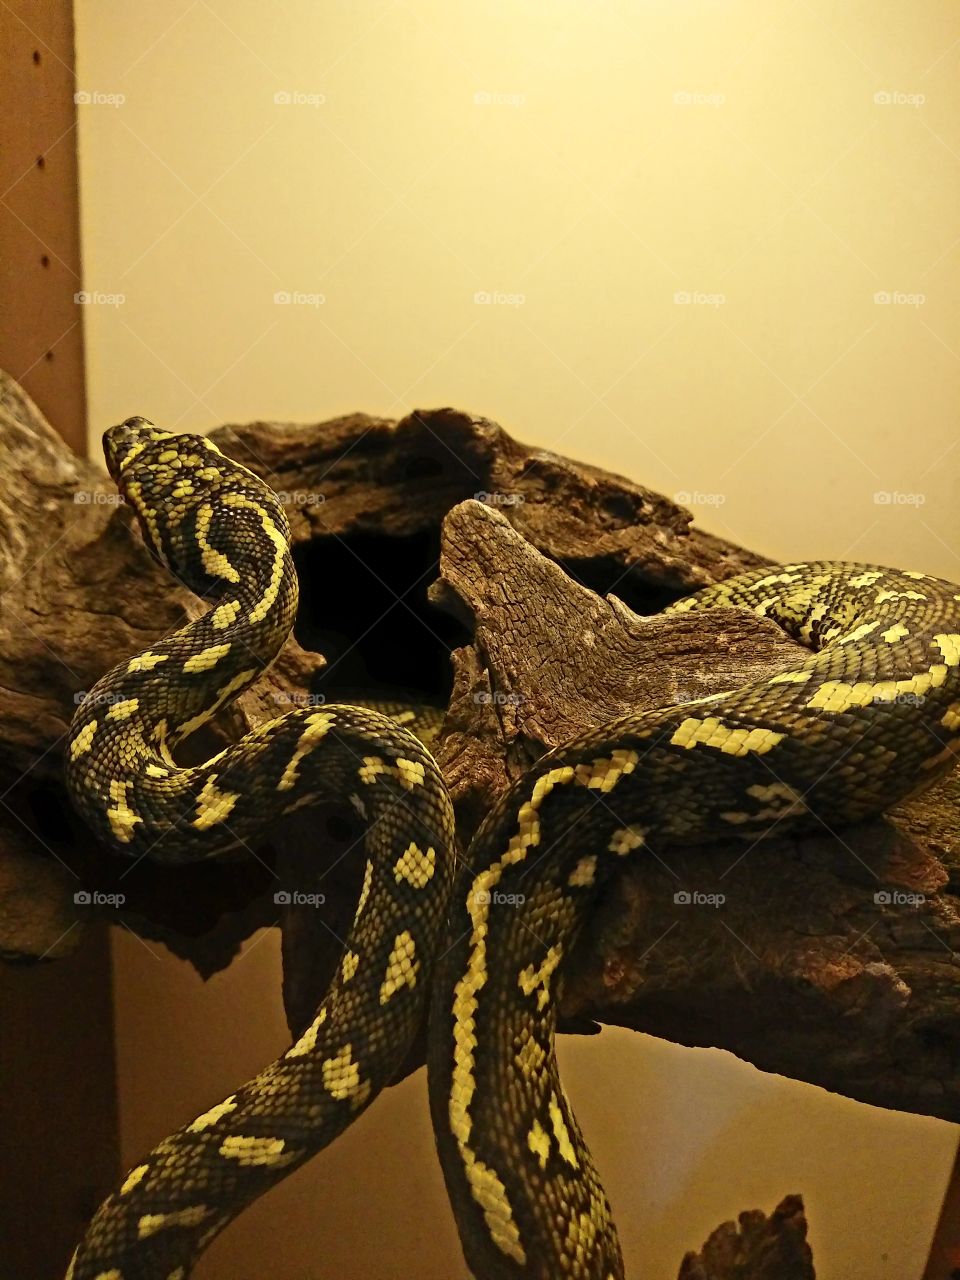 Pet diamond python named cyclone found in a neighbour's tree